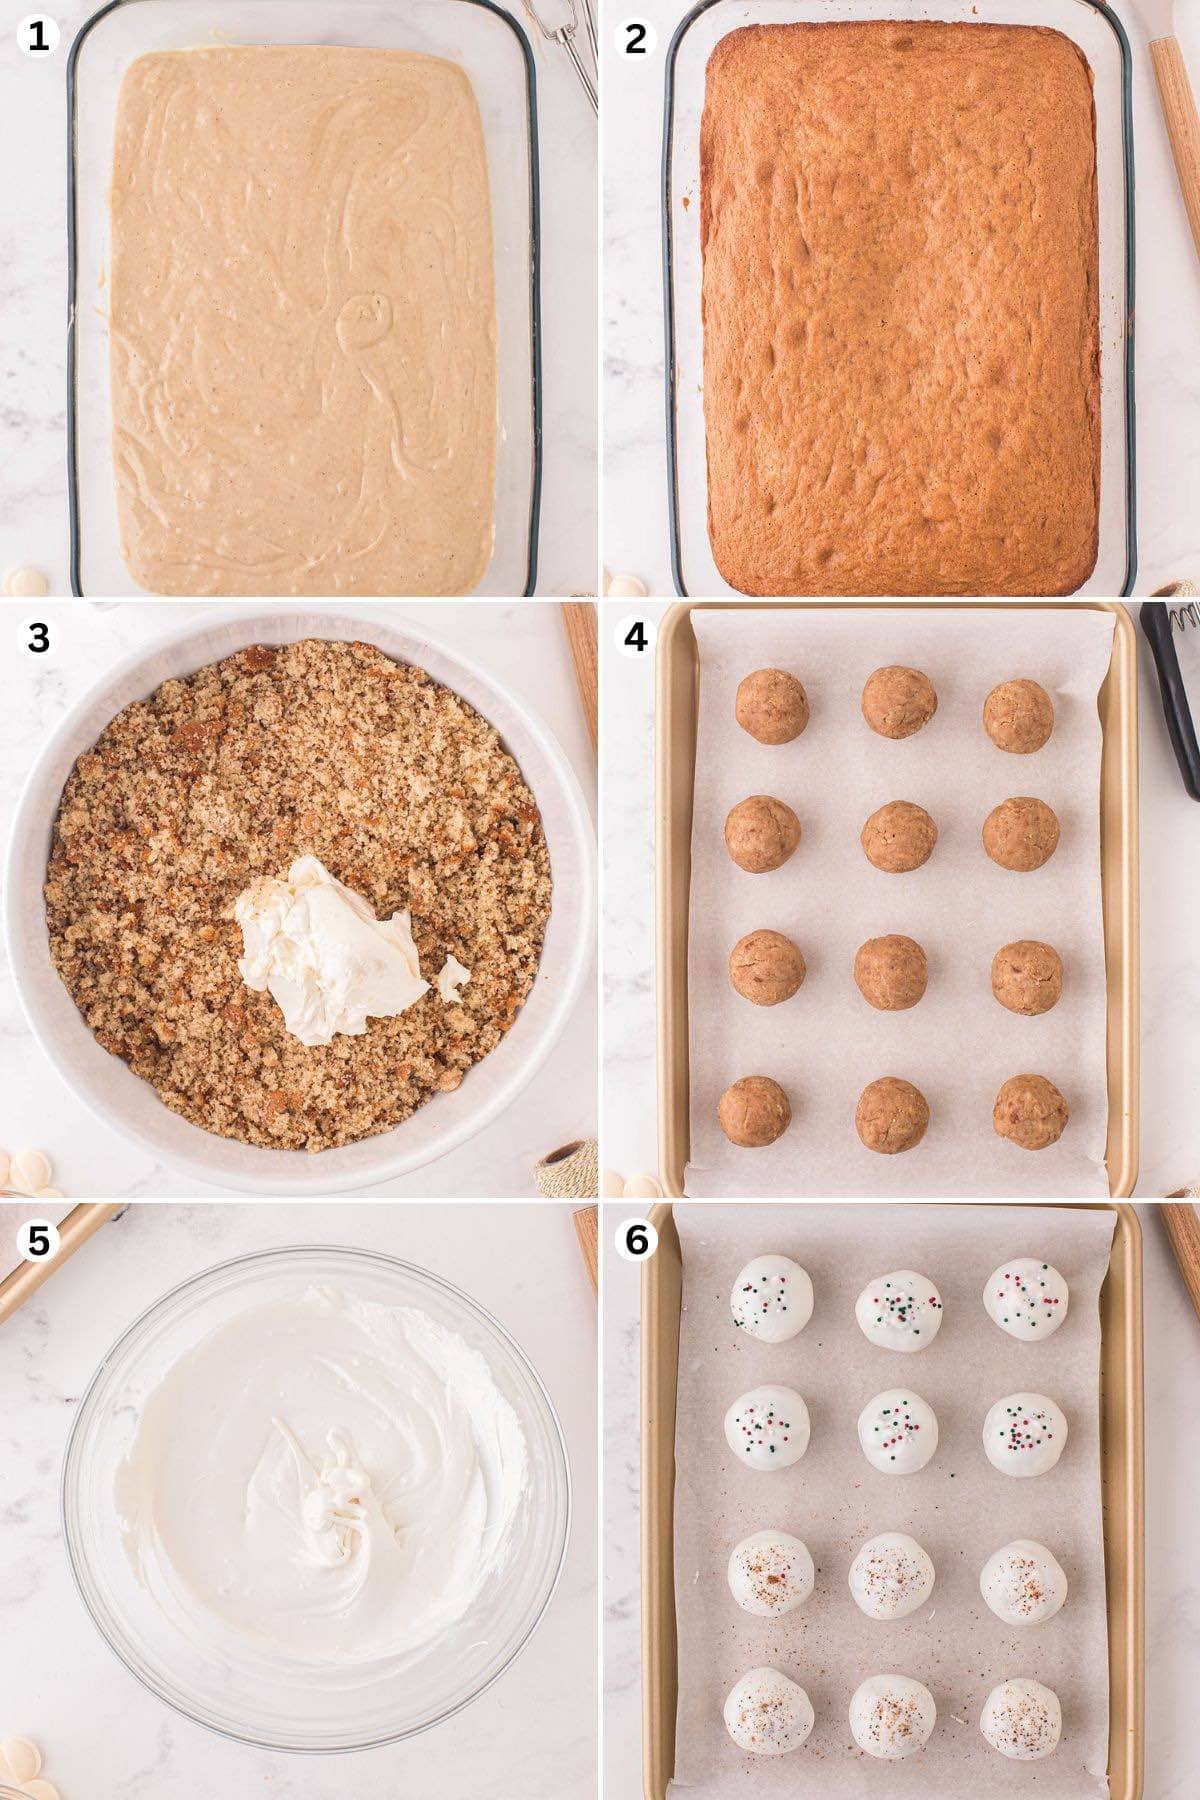 Bake the cake and allow it to cool completely then crumble it into pieces. Mix the cream cheese spread into the cake crumbs until the cake sticks together to form a dough. Scoop out cake balls and place them on the baking sheet. Roll a cake ball in the candy coating and decorate with sprinkles or other garnishes.